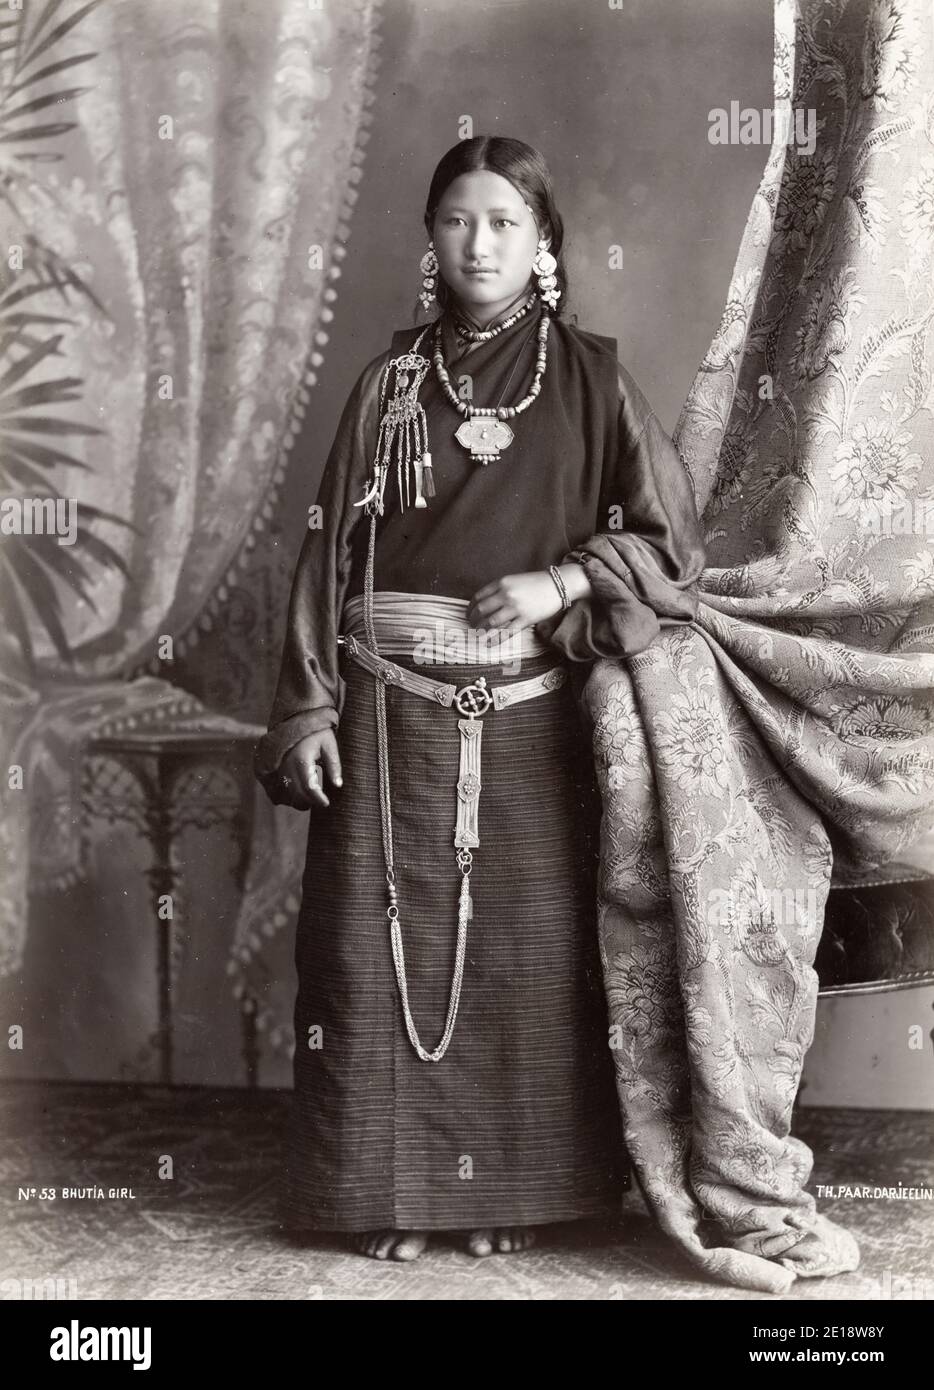 Vintage 19th century photograph - Bhutia girl. The Bhutia constitute a majority of the population of Bhutan, where they live mainly in the western and central regions of the country, and form minorities in Nepal and India, particularly in the Indian state of Sikkim. Stock Photo